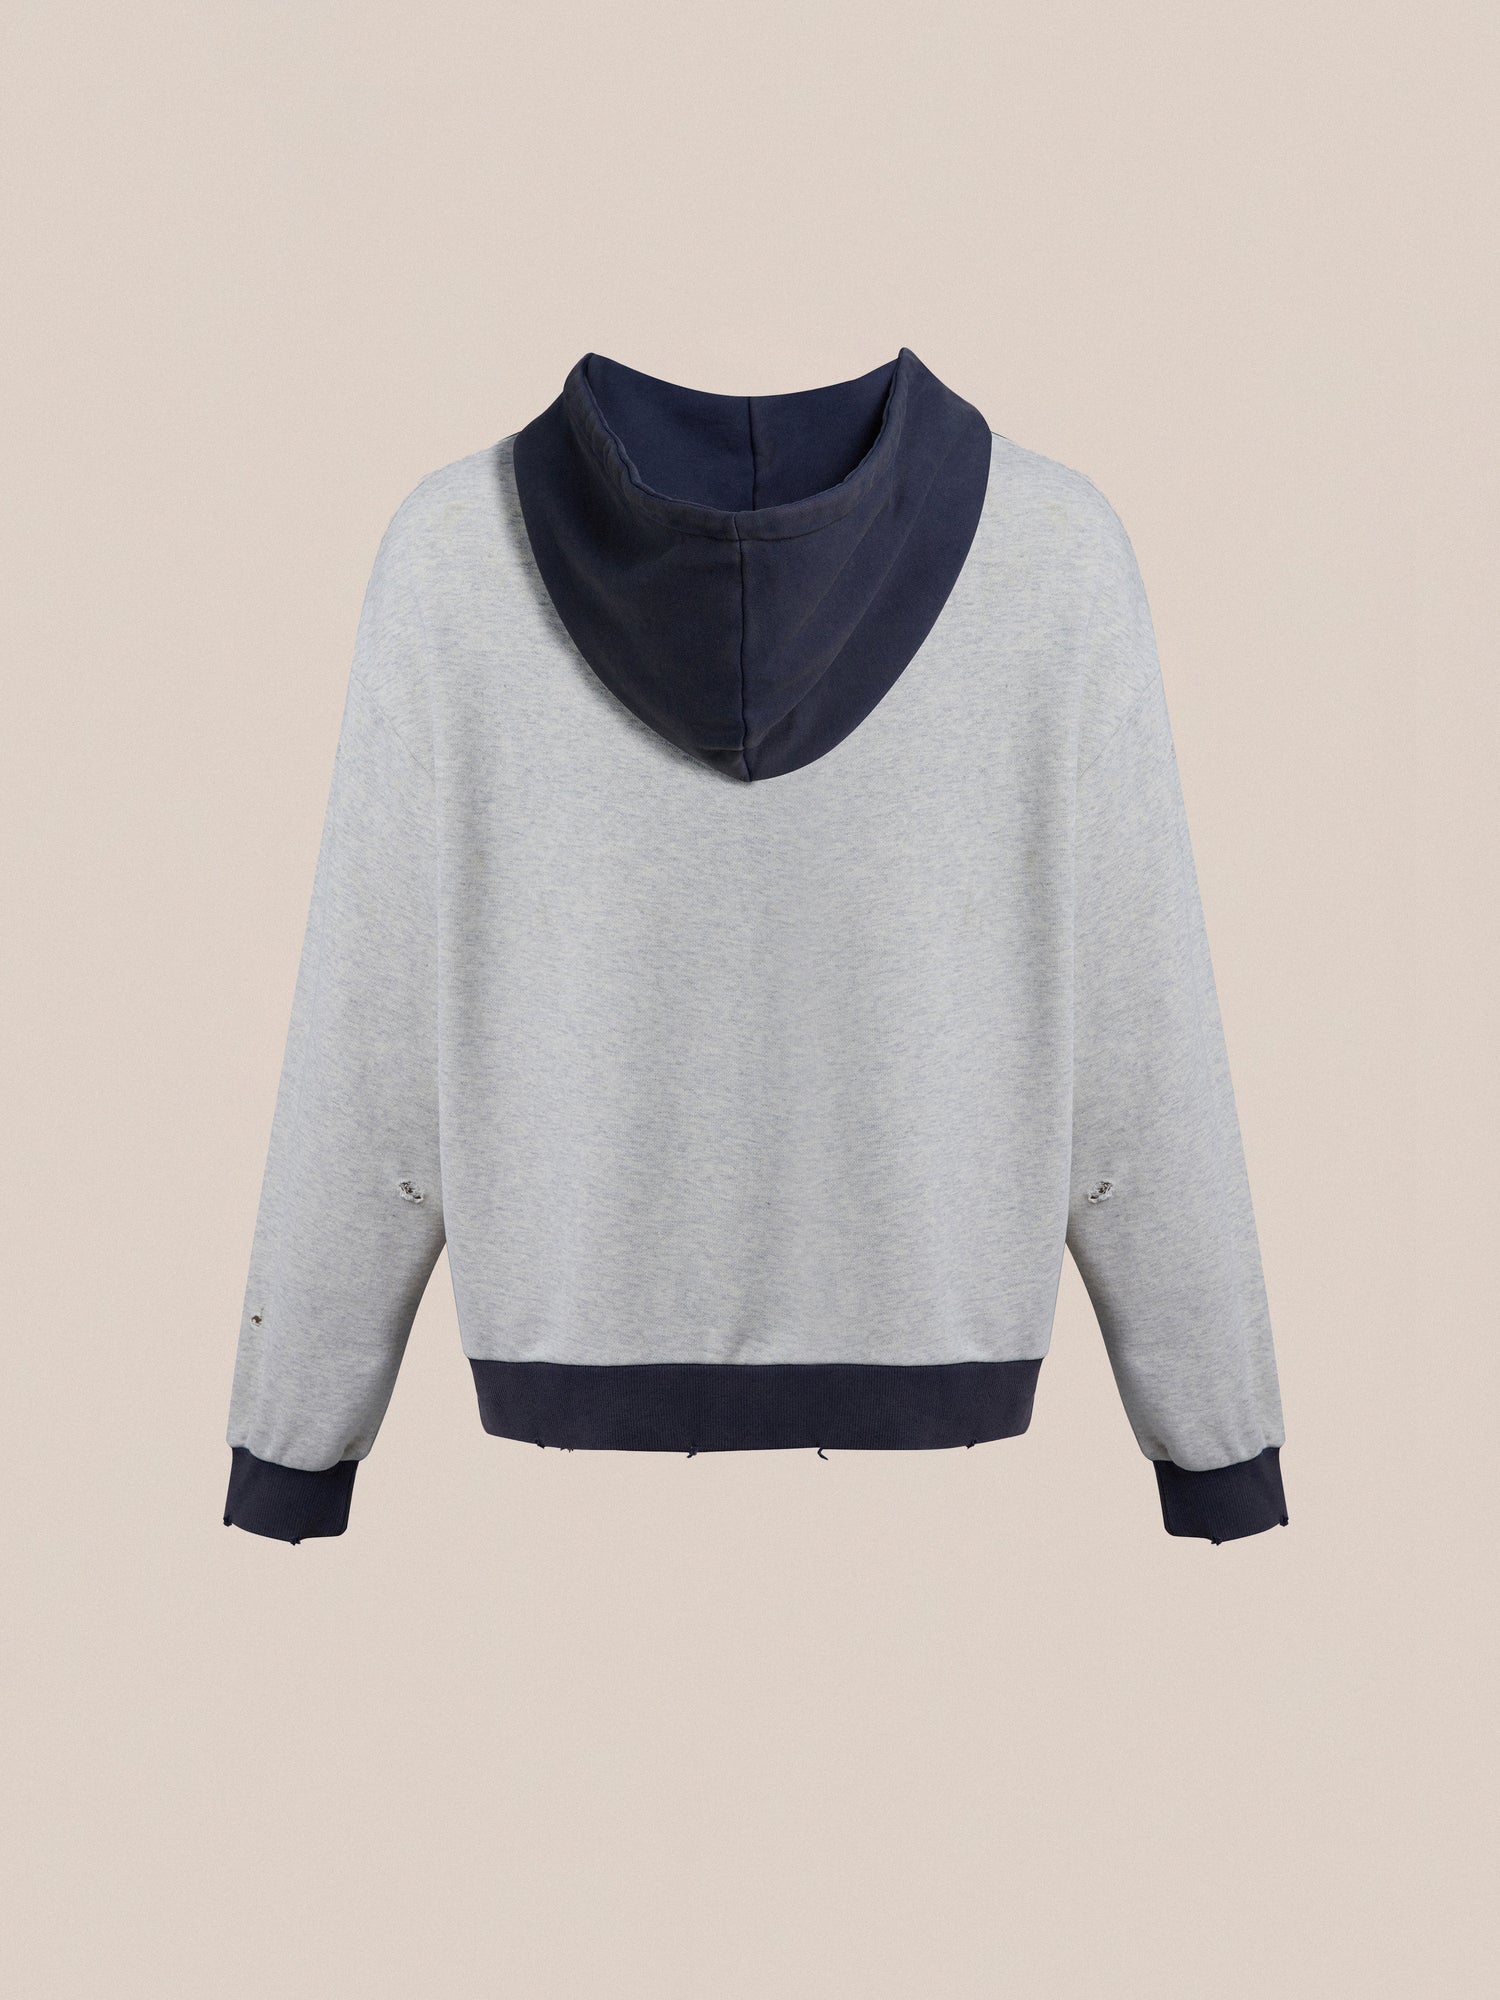 The back view of a Found two tone hoodie made from enzyme-washed cotton in grey and navy.